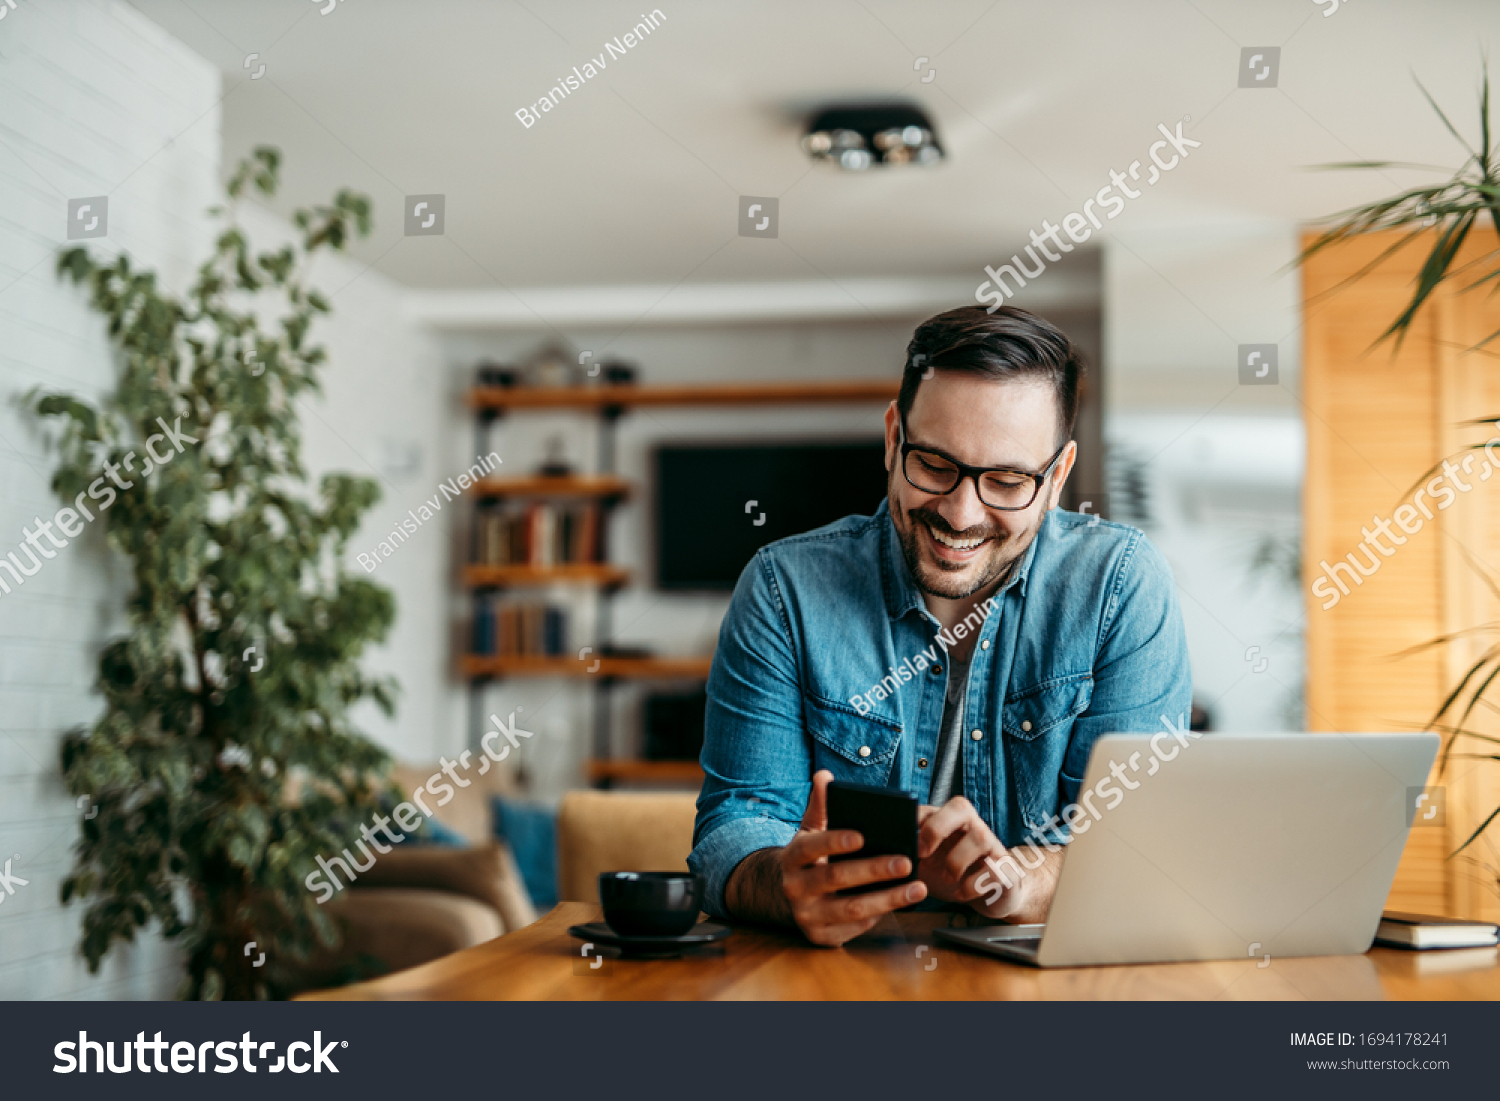 Portrait of a cheerful man using smart phone at home office. #1694178241